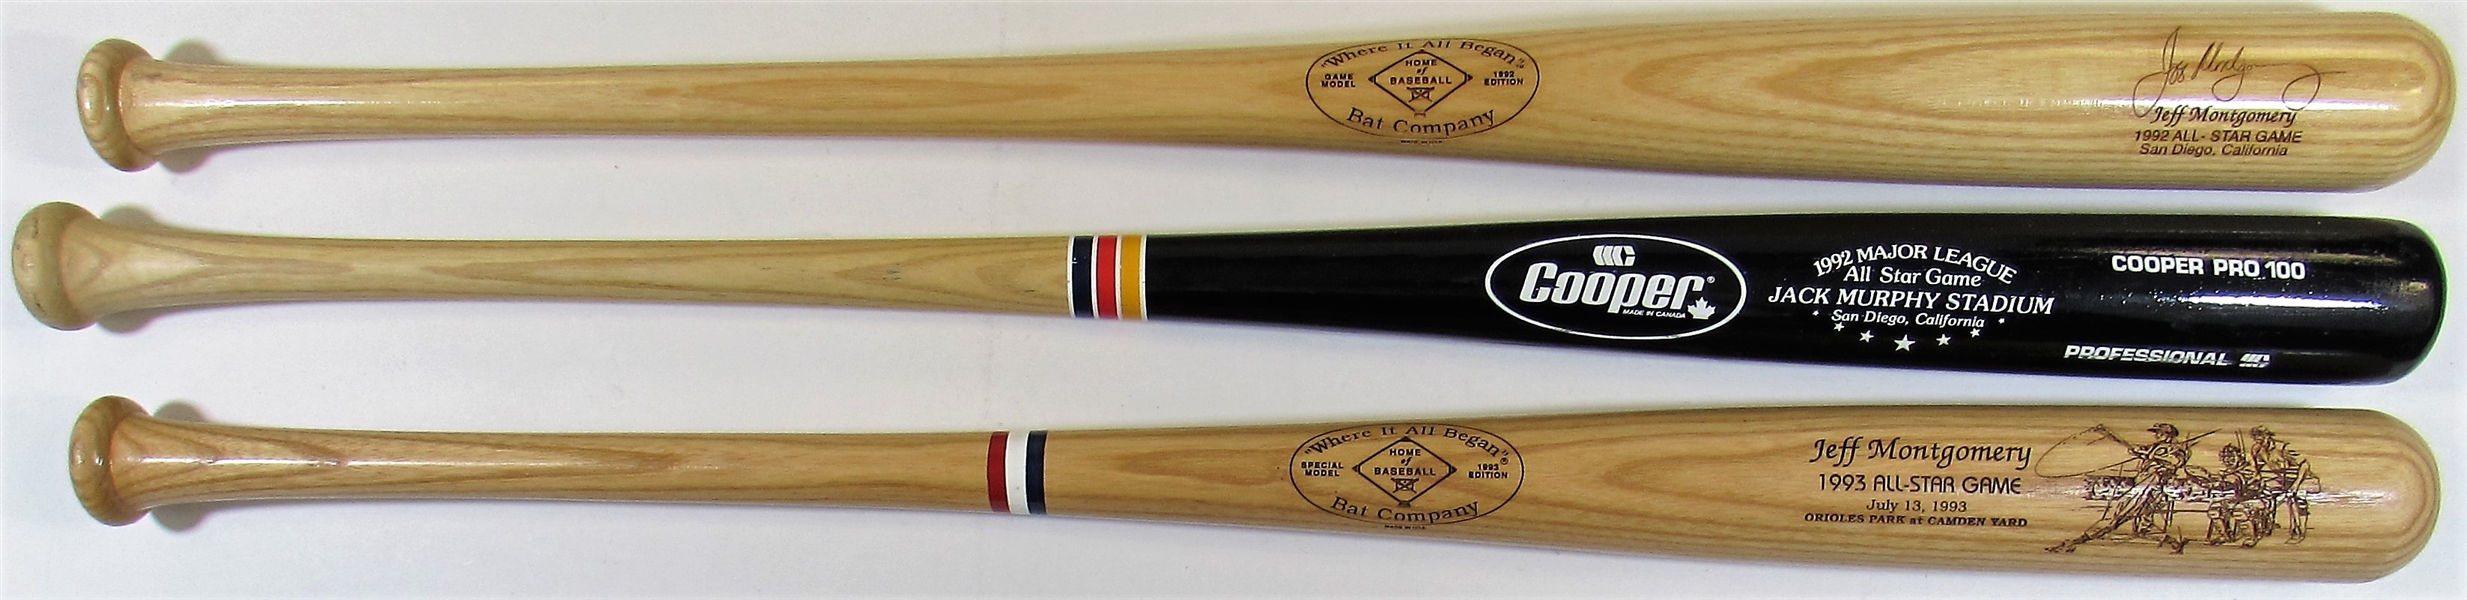 Jeff Montgomery lot of 3 All-Star Game Bats